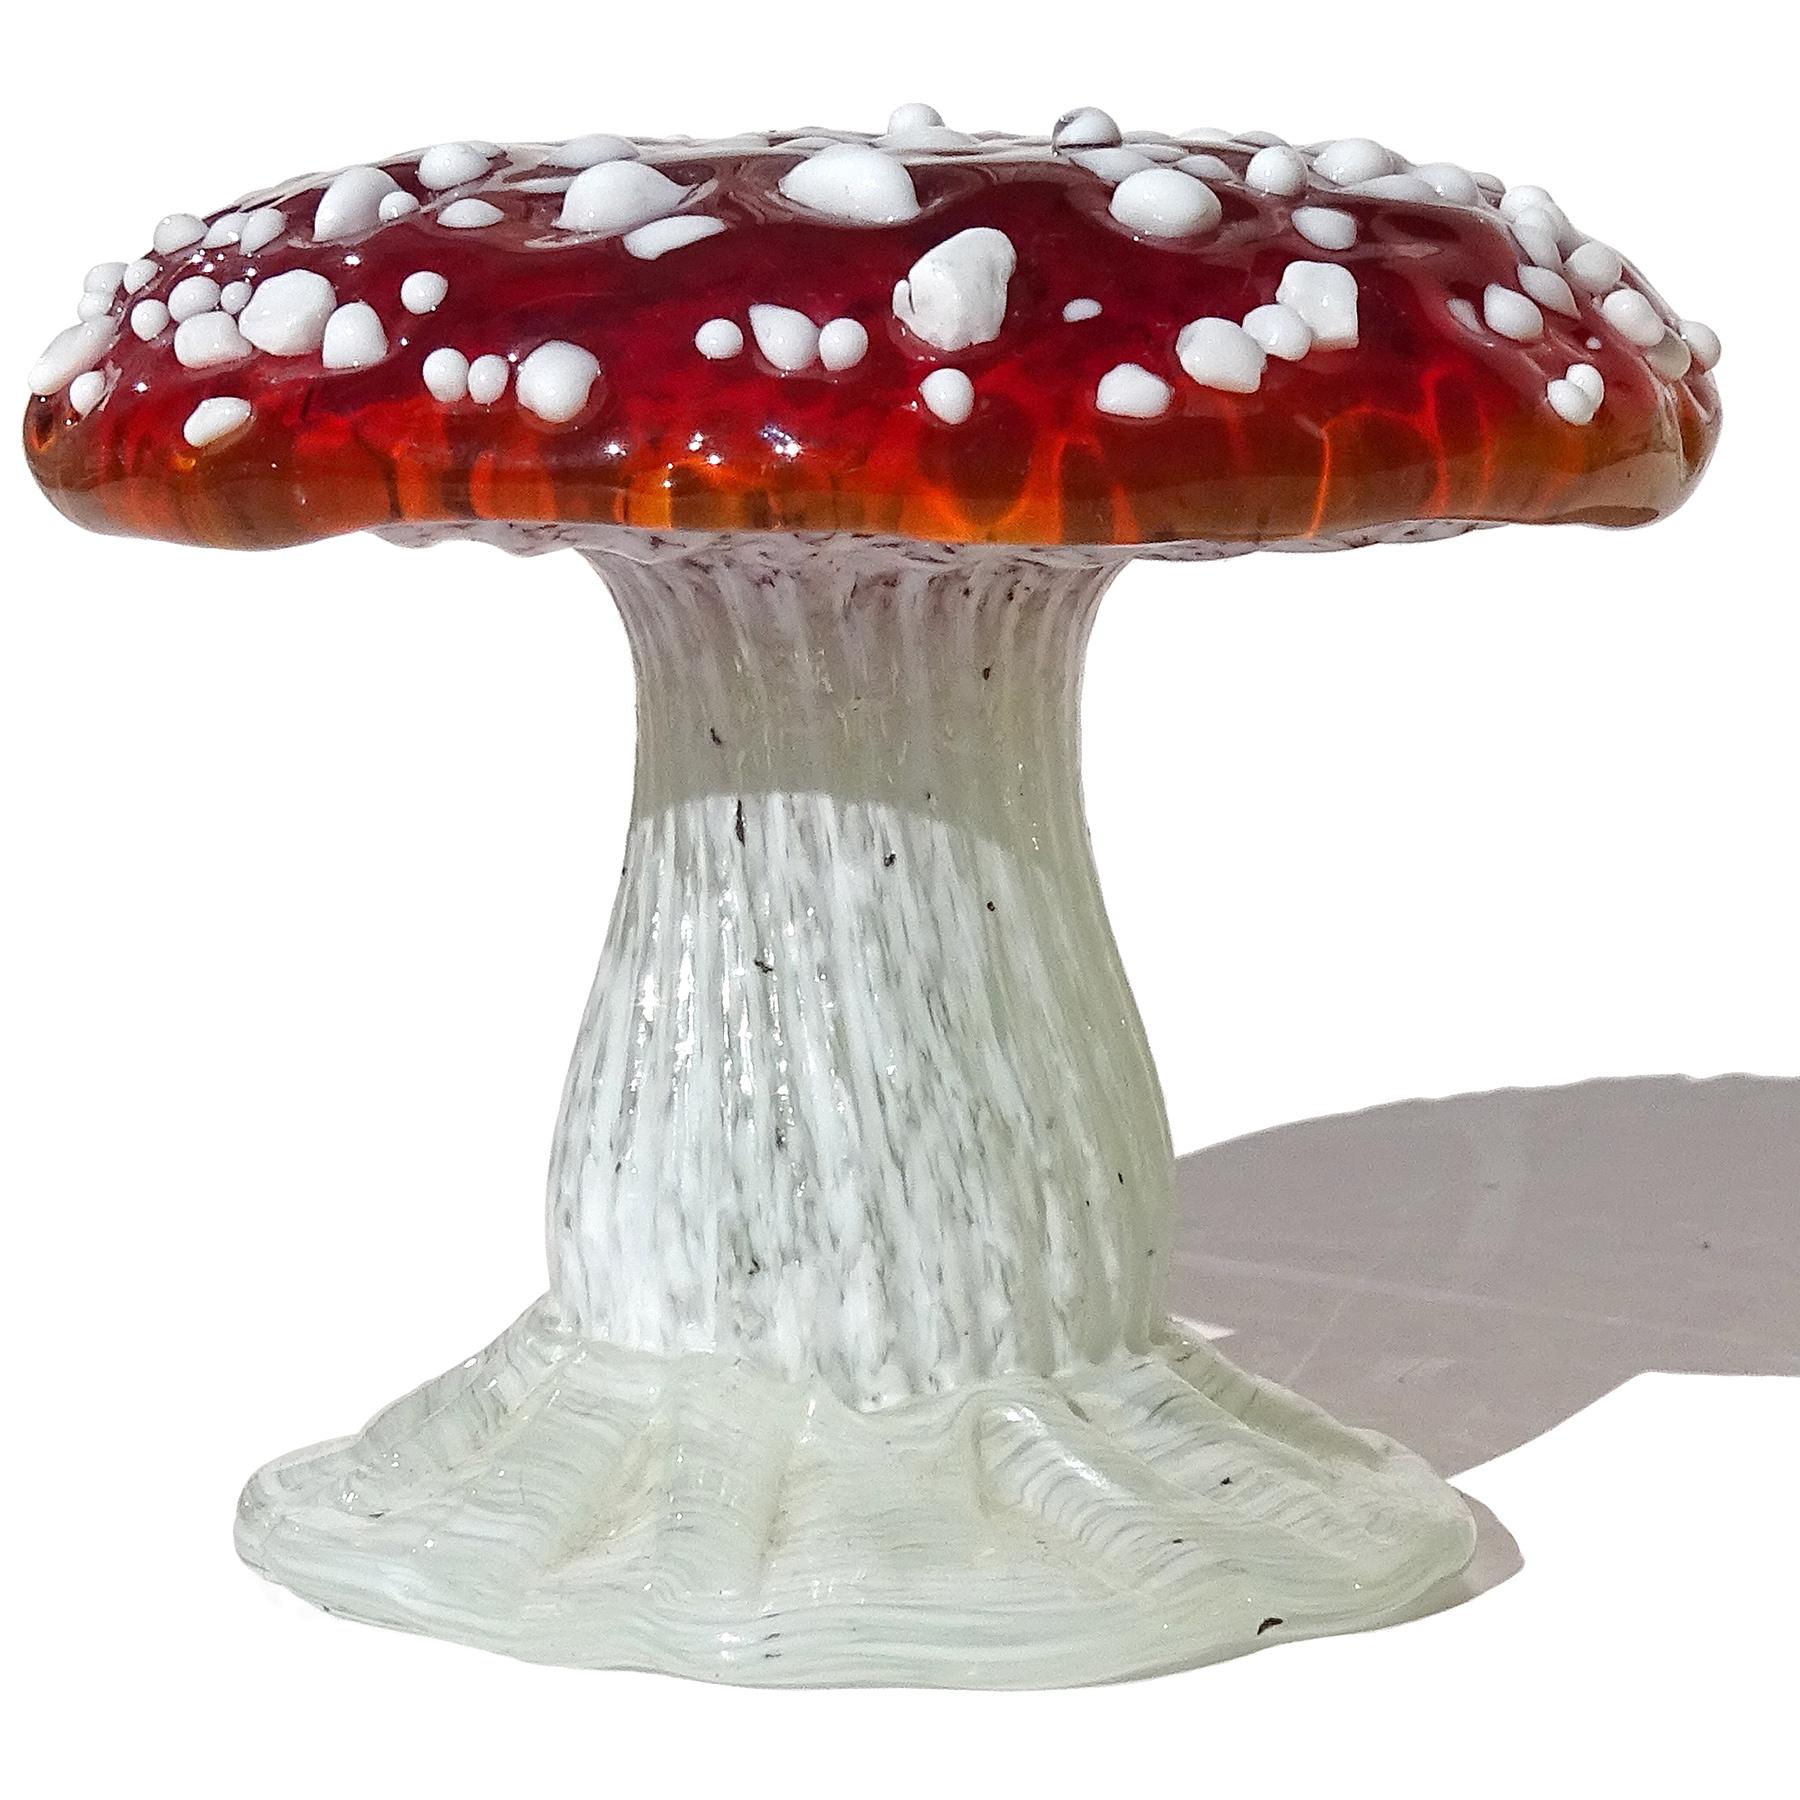 Hand-Crafted Murano Red White Spot Italian Art Glass Mushroom Toadstool Paperweight Sculpture For Sale